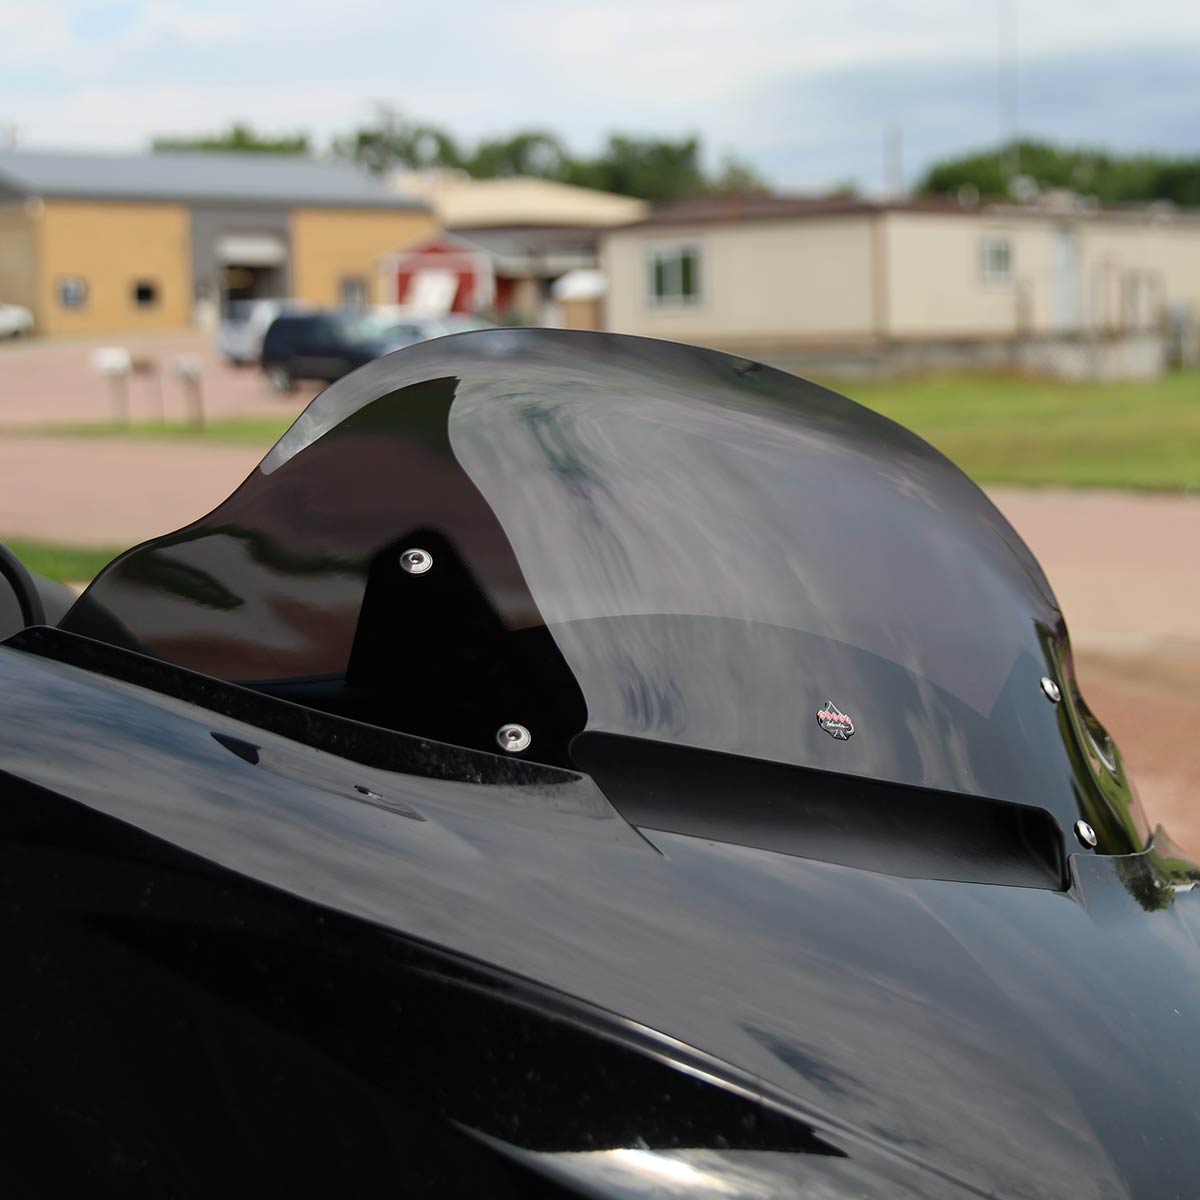 6.5" Flare™ Windshield For Victory® Cross Country motorcycle models